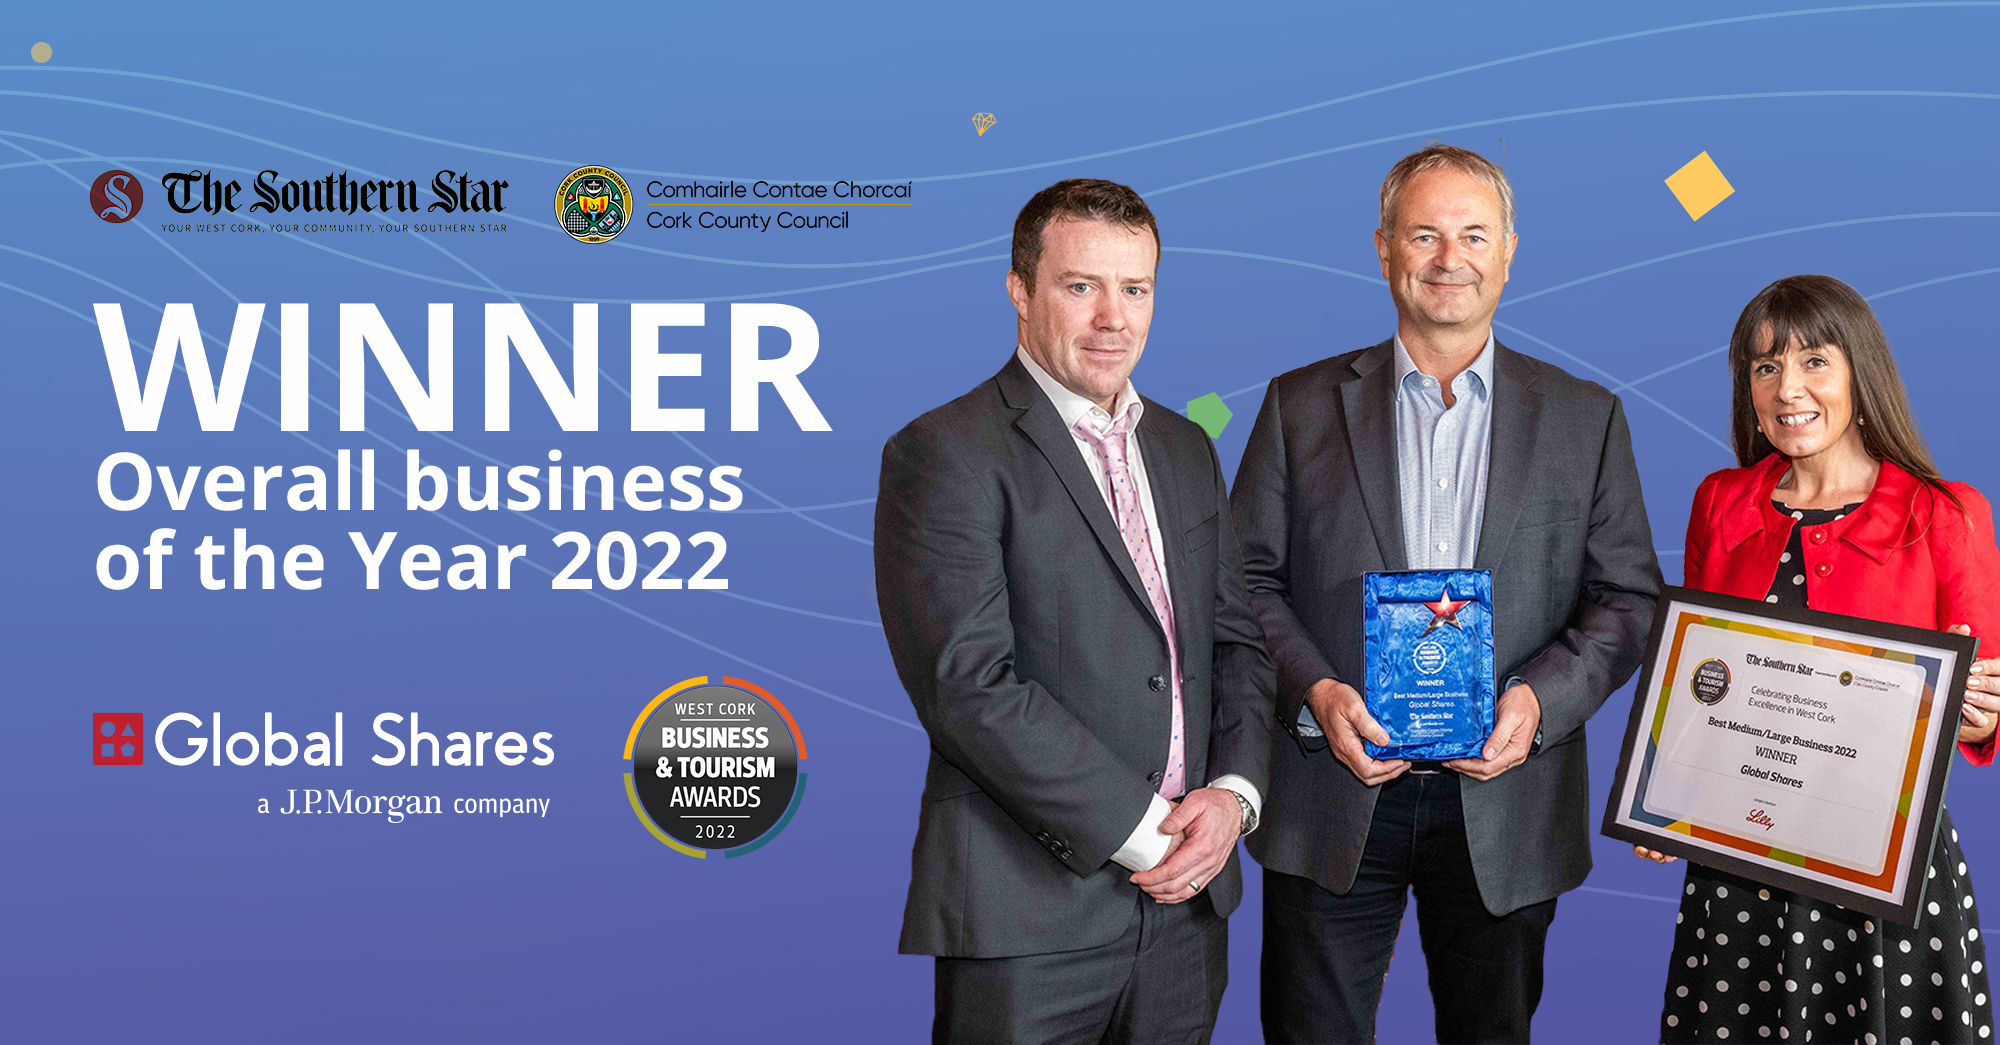 Overall Winner Business of the Year 2022 